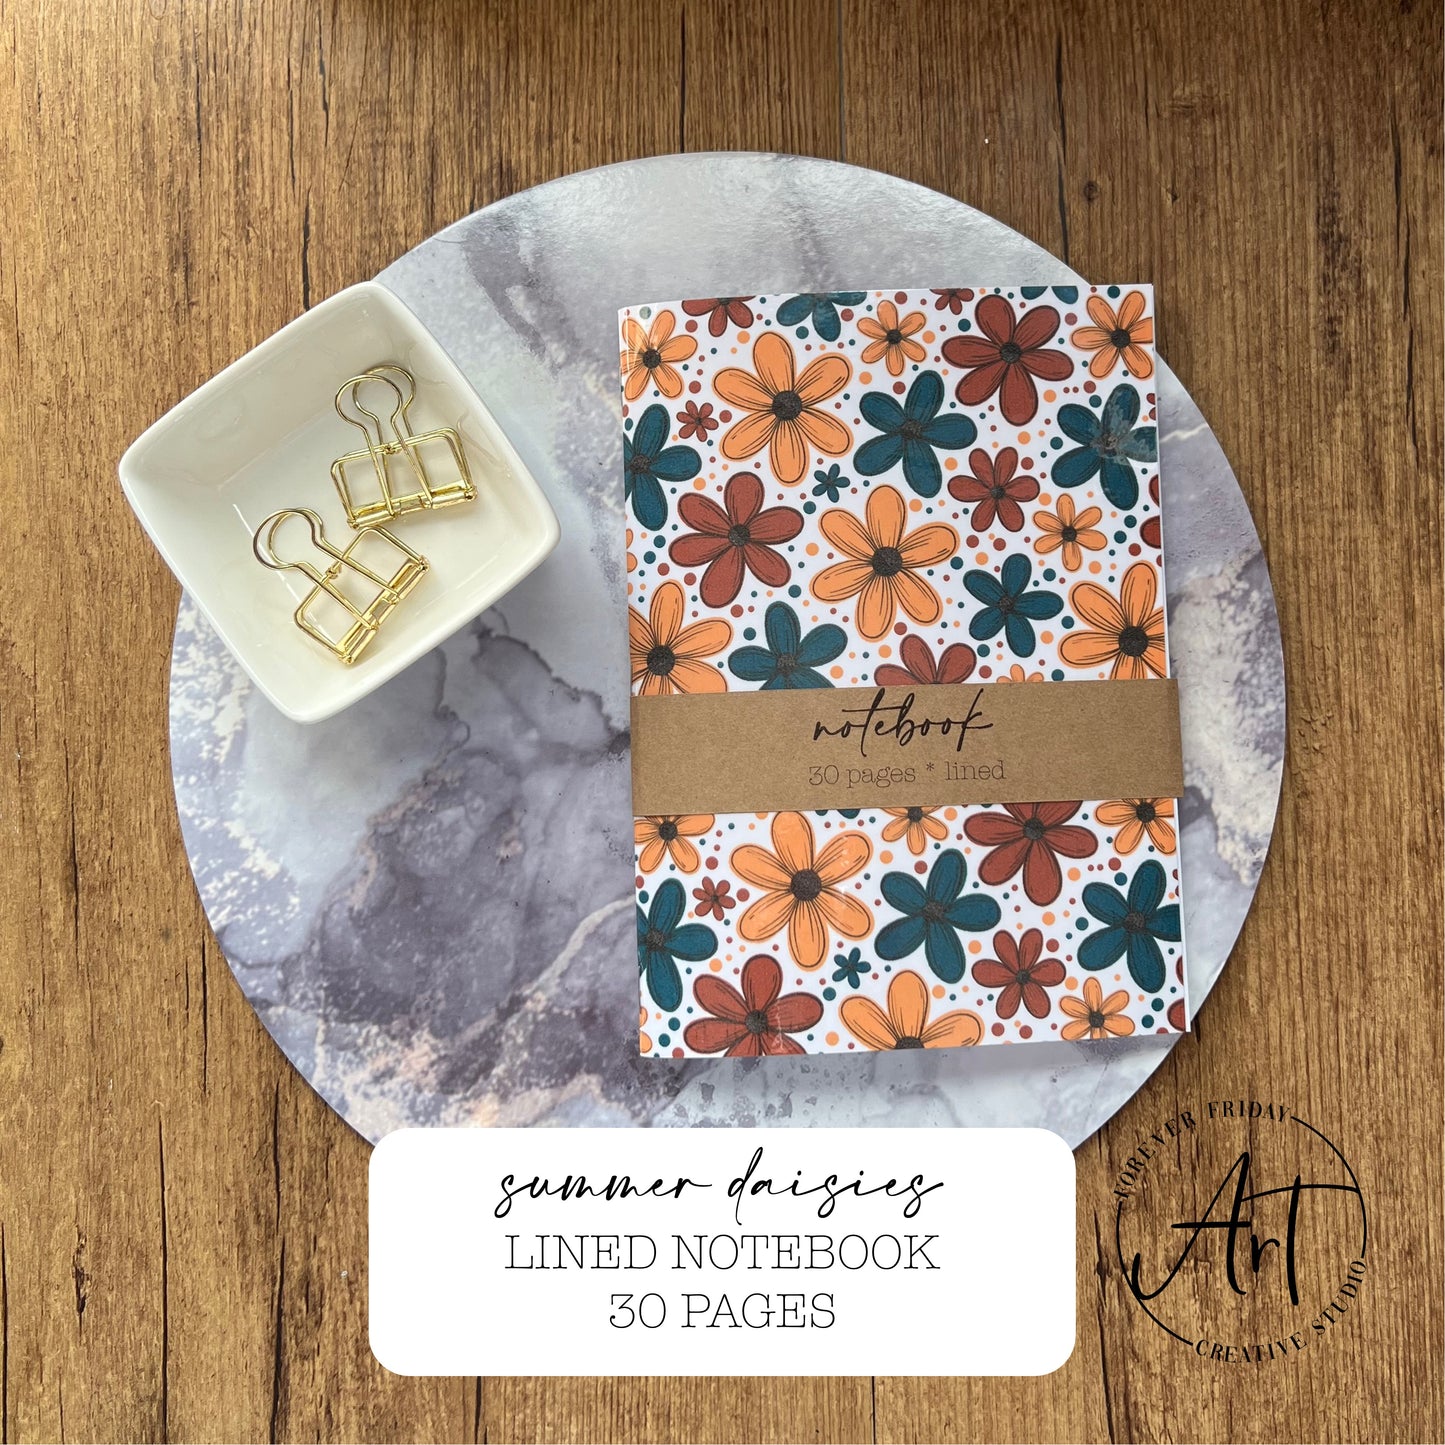 Summer Daisies Lined Notebook